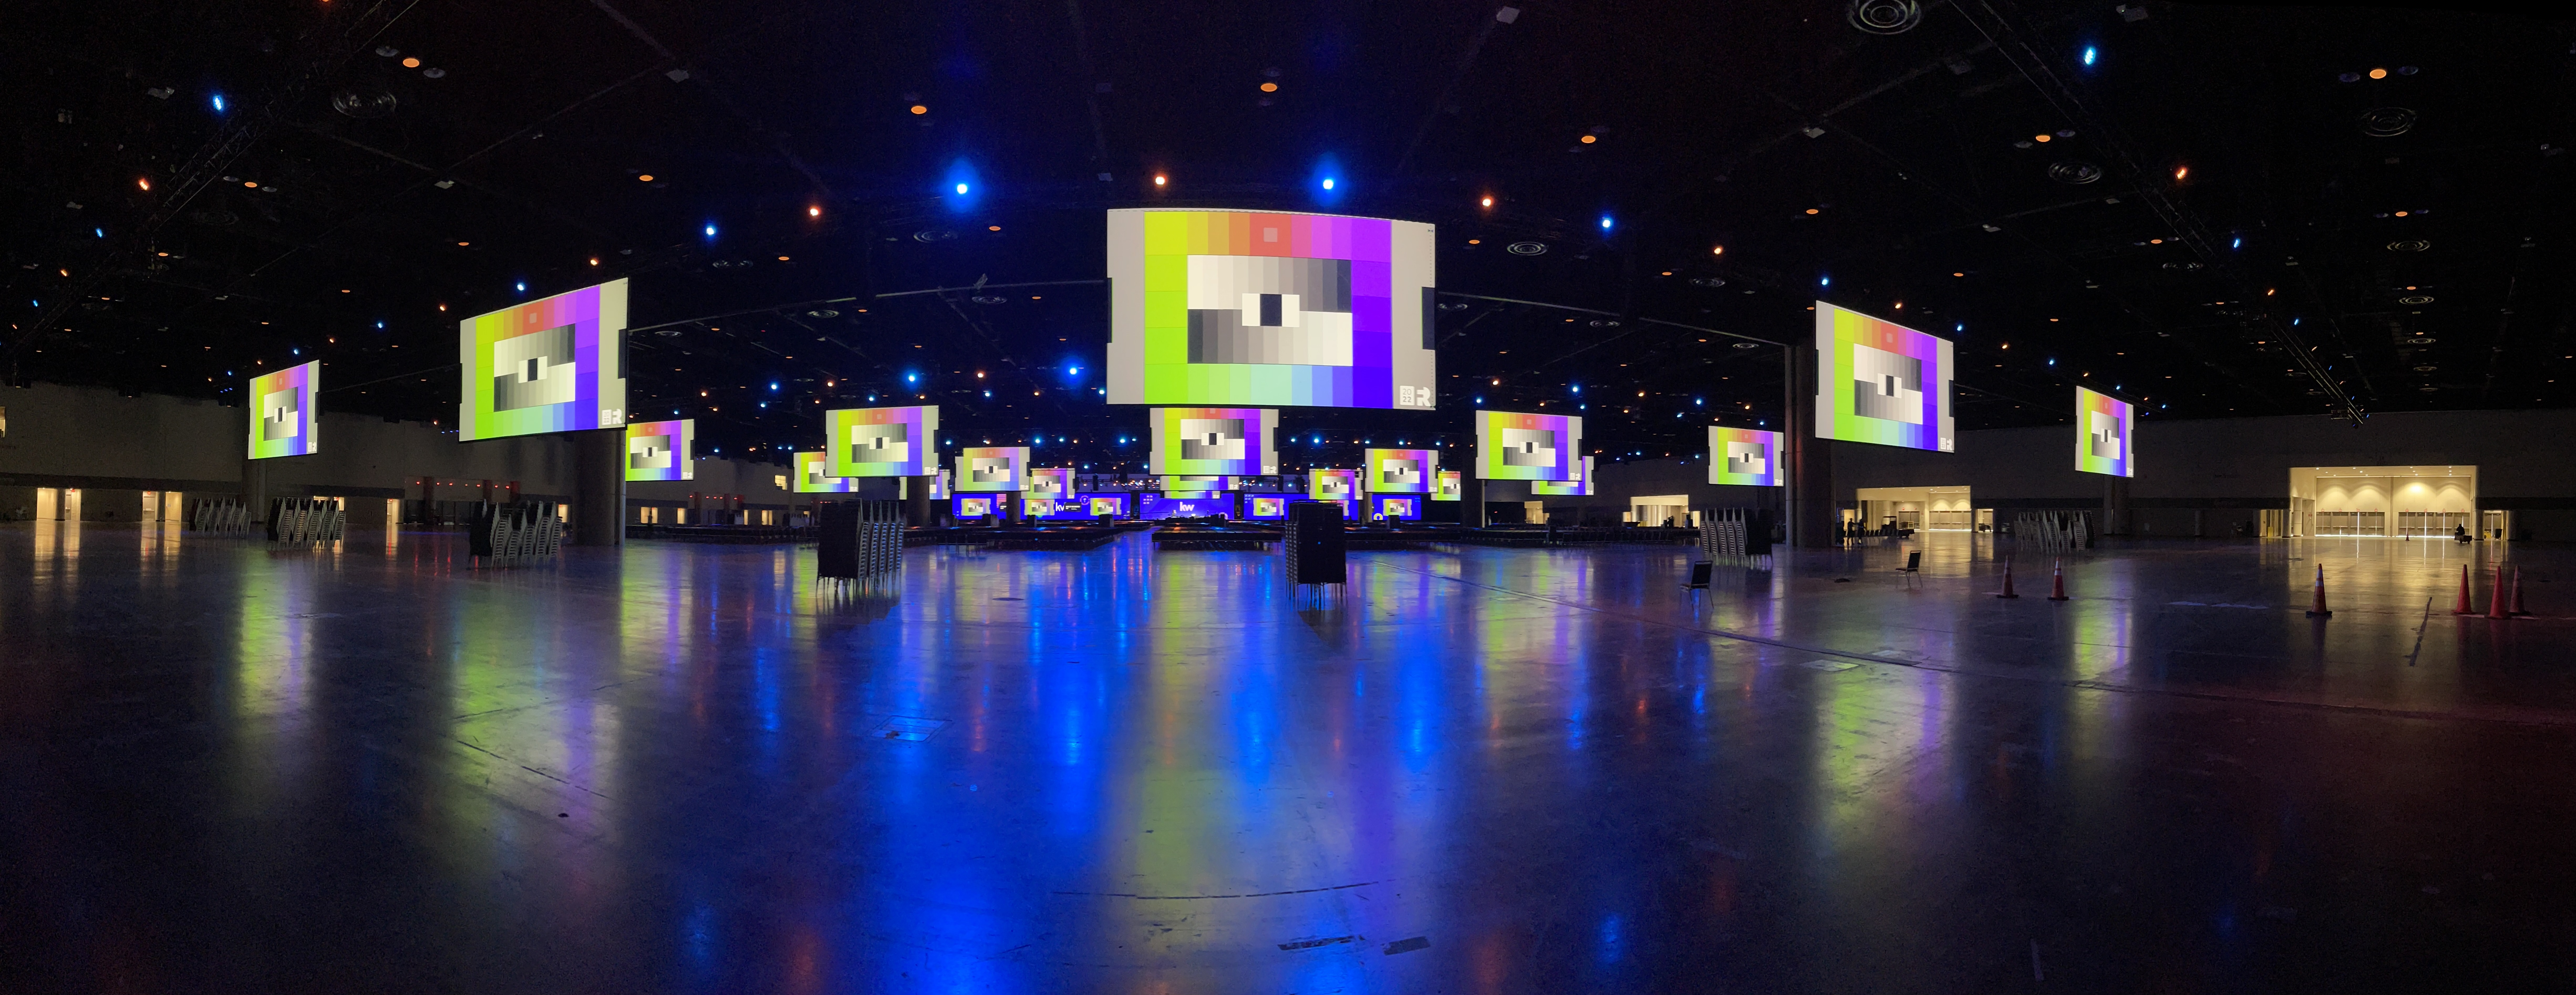 Wide-angle view of a large convention center with multiple large video screens displaying colorful graphics.